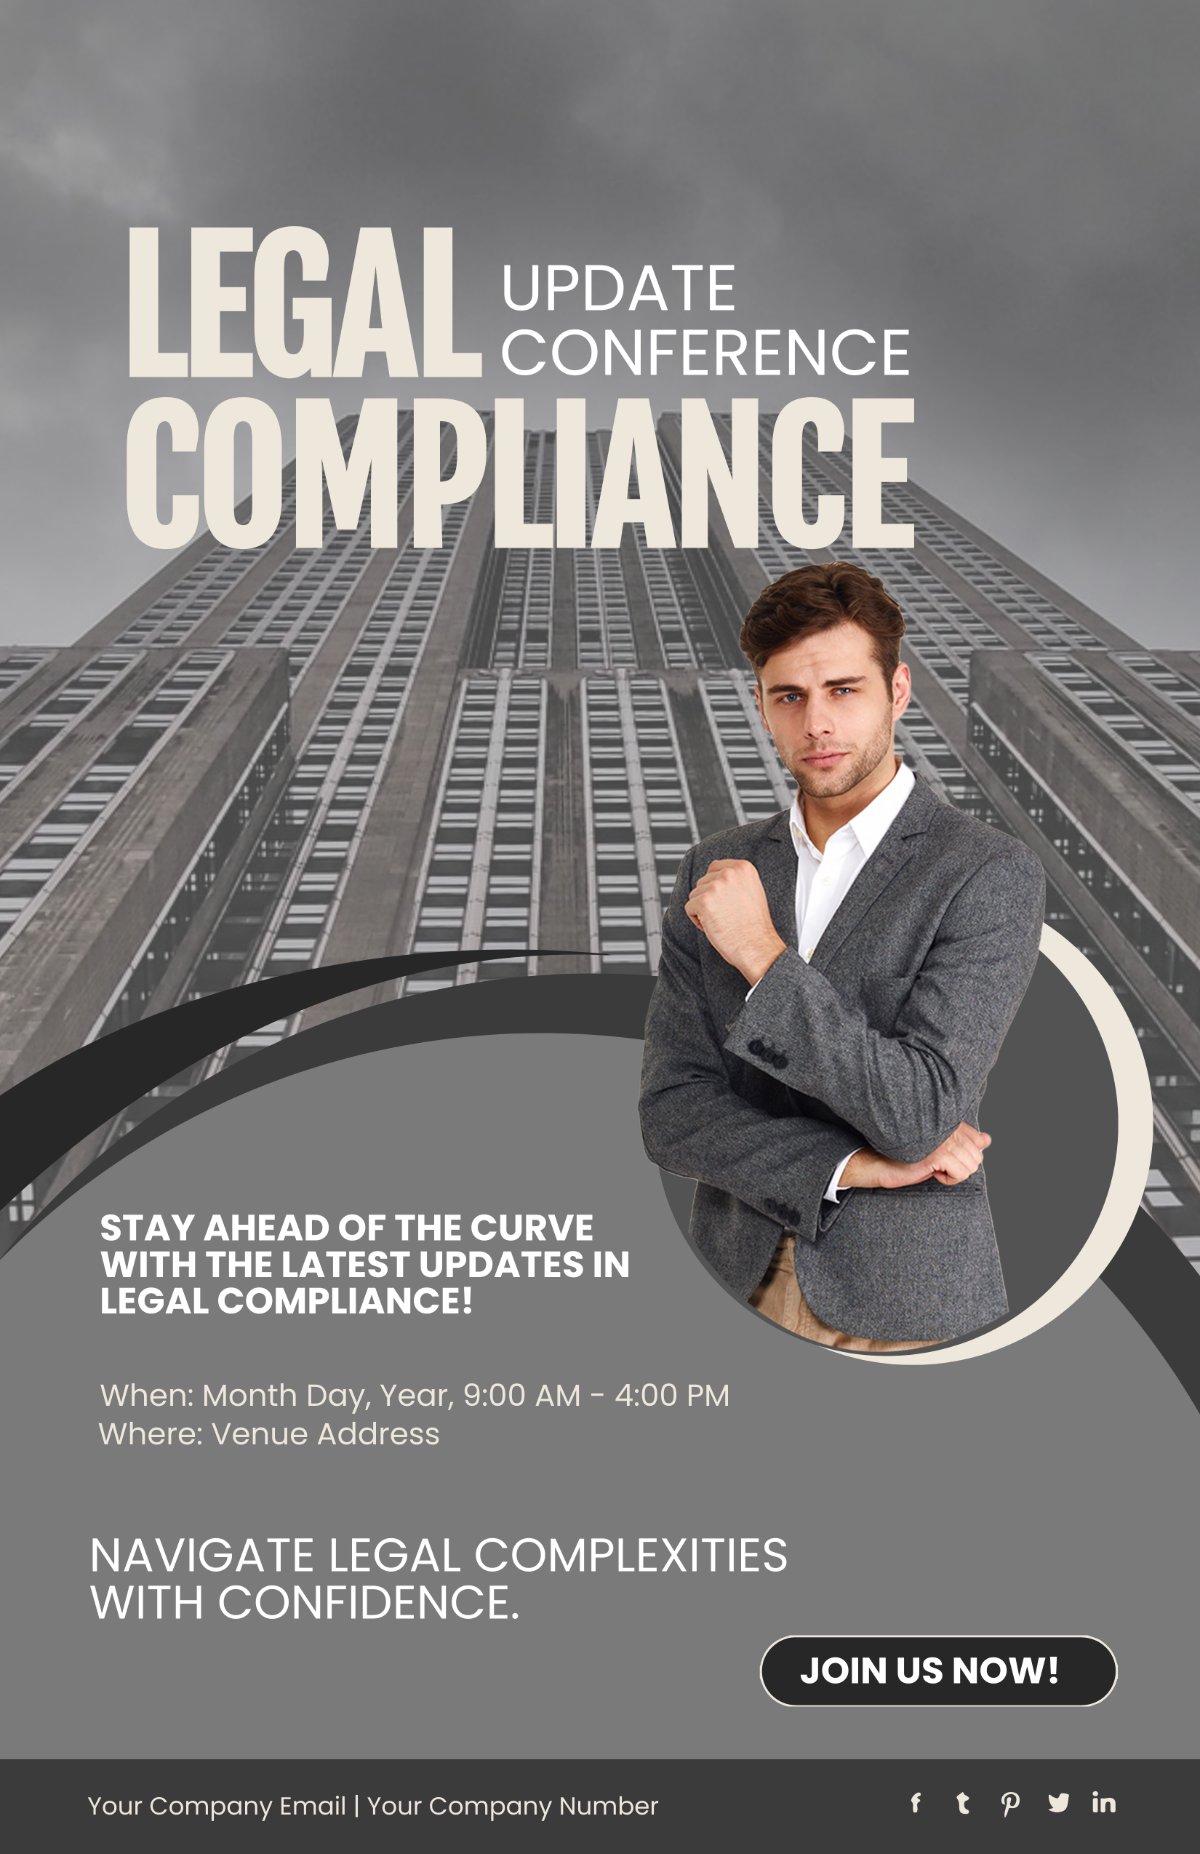 Free Legal Compliance Update Conference Poster Template